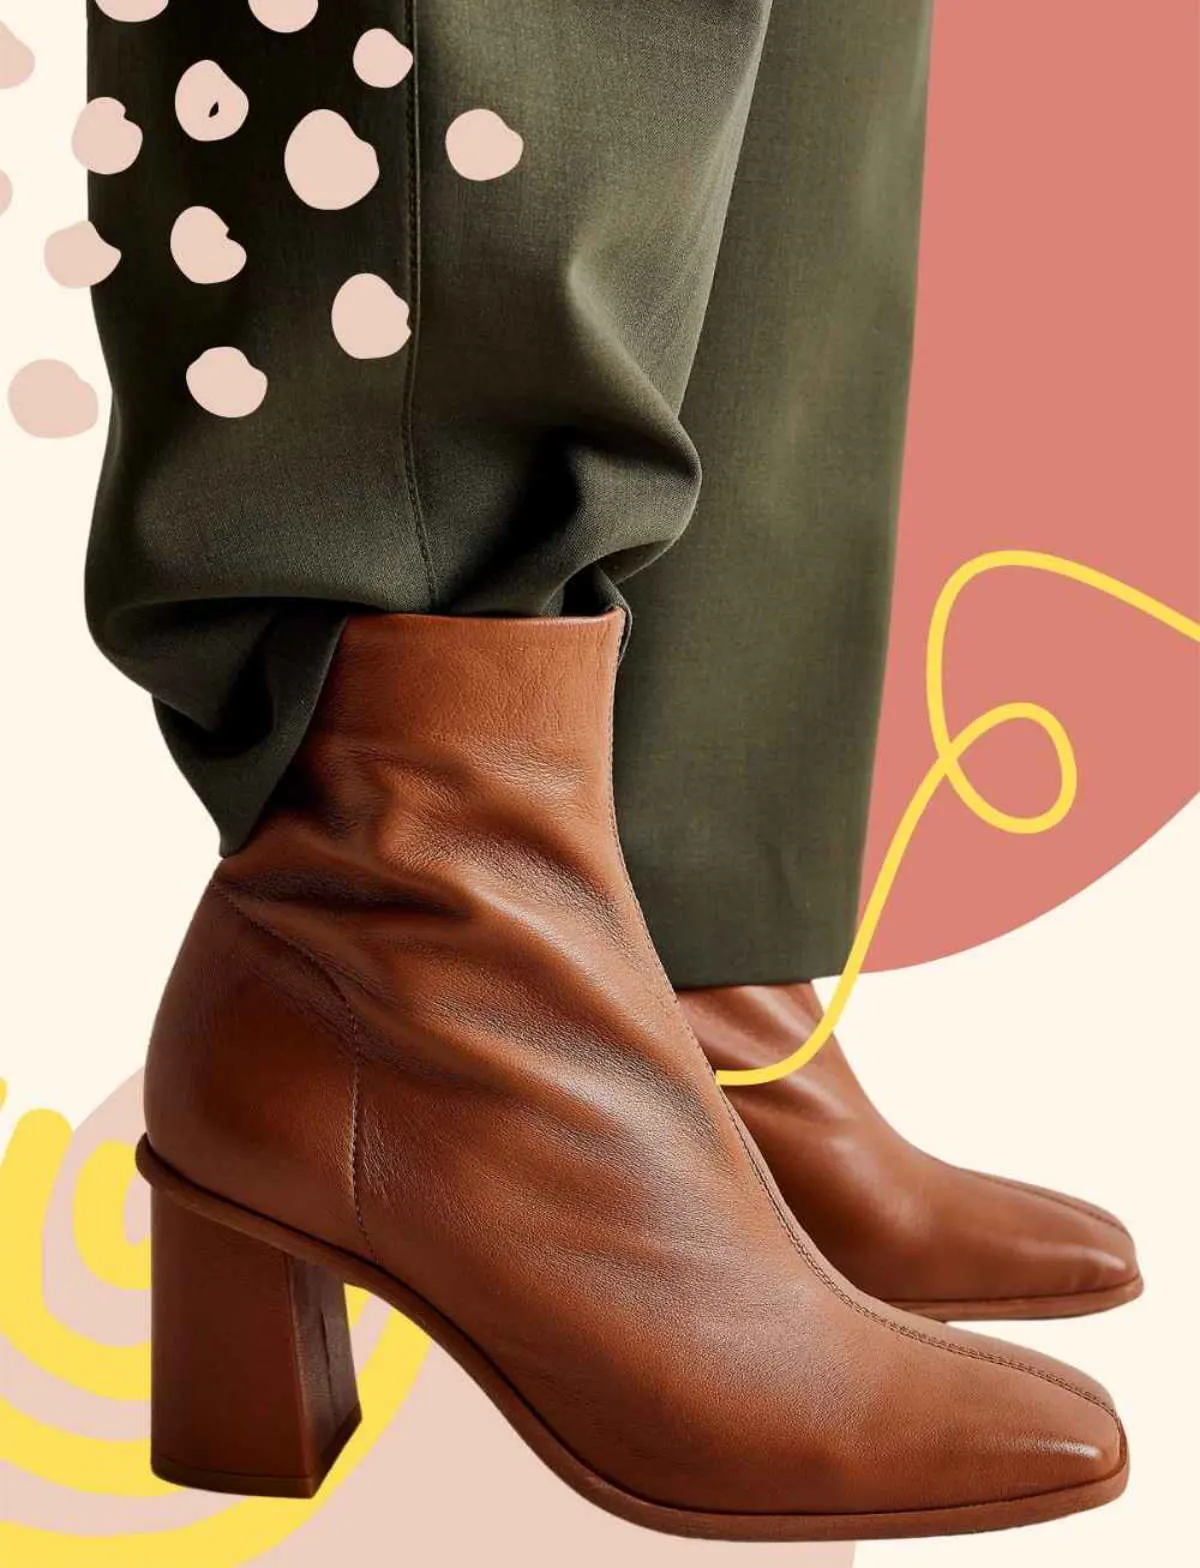 Collage of close up of woman wearing brown ankle boots and dress pants over various colors and shapes.